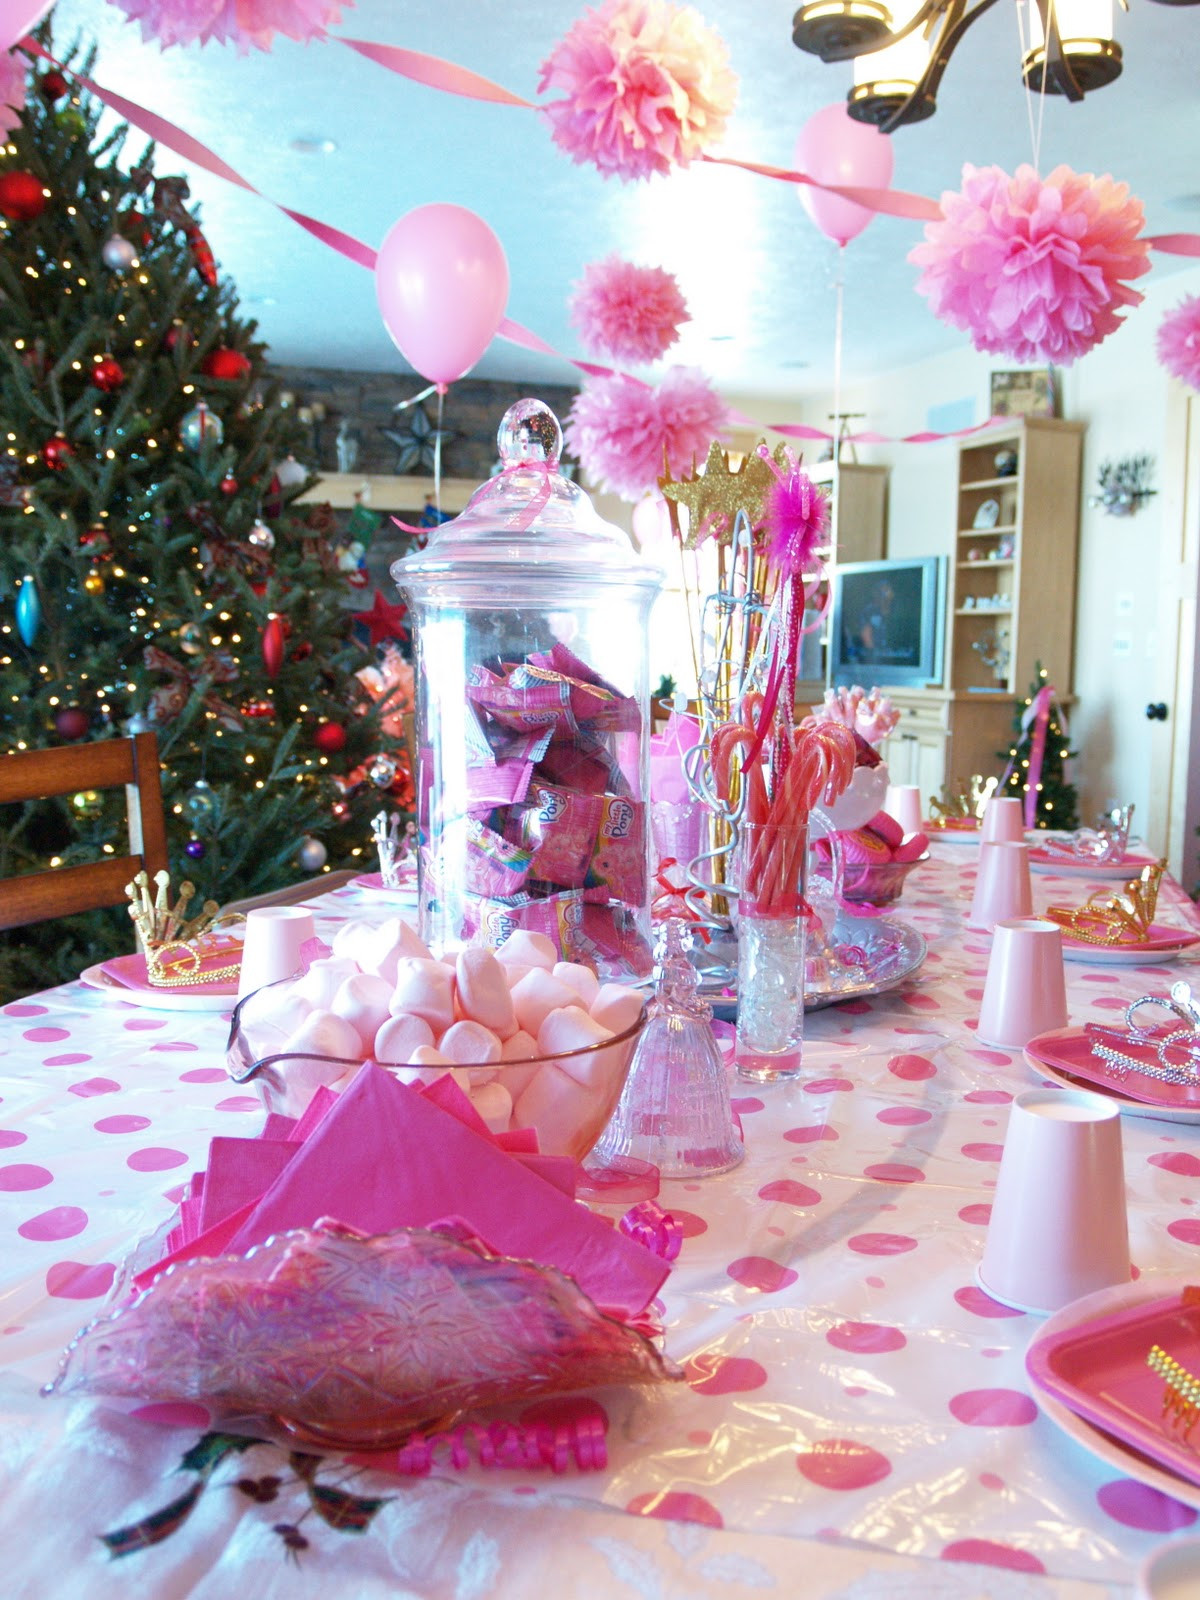 Decoration Ideas For Birthday Party
 Show Us Your Life A Pinkalicious Birthday Party The